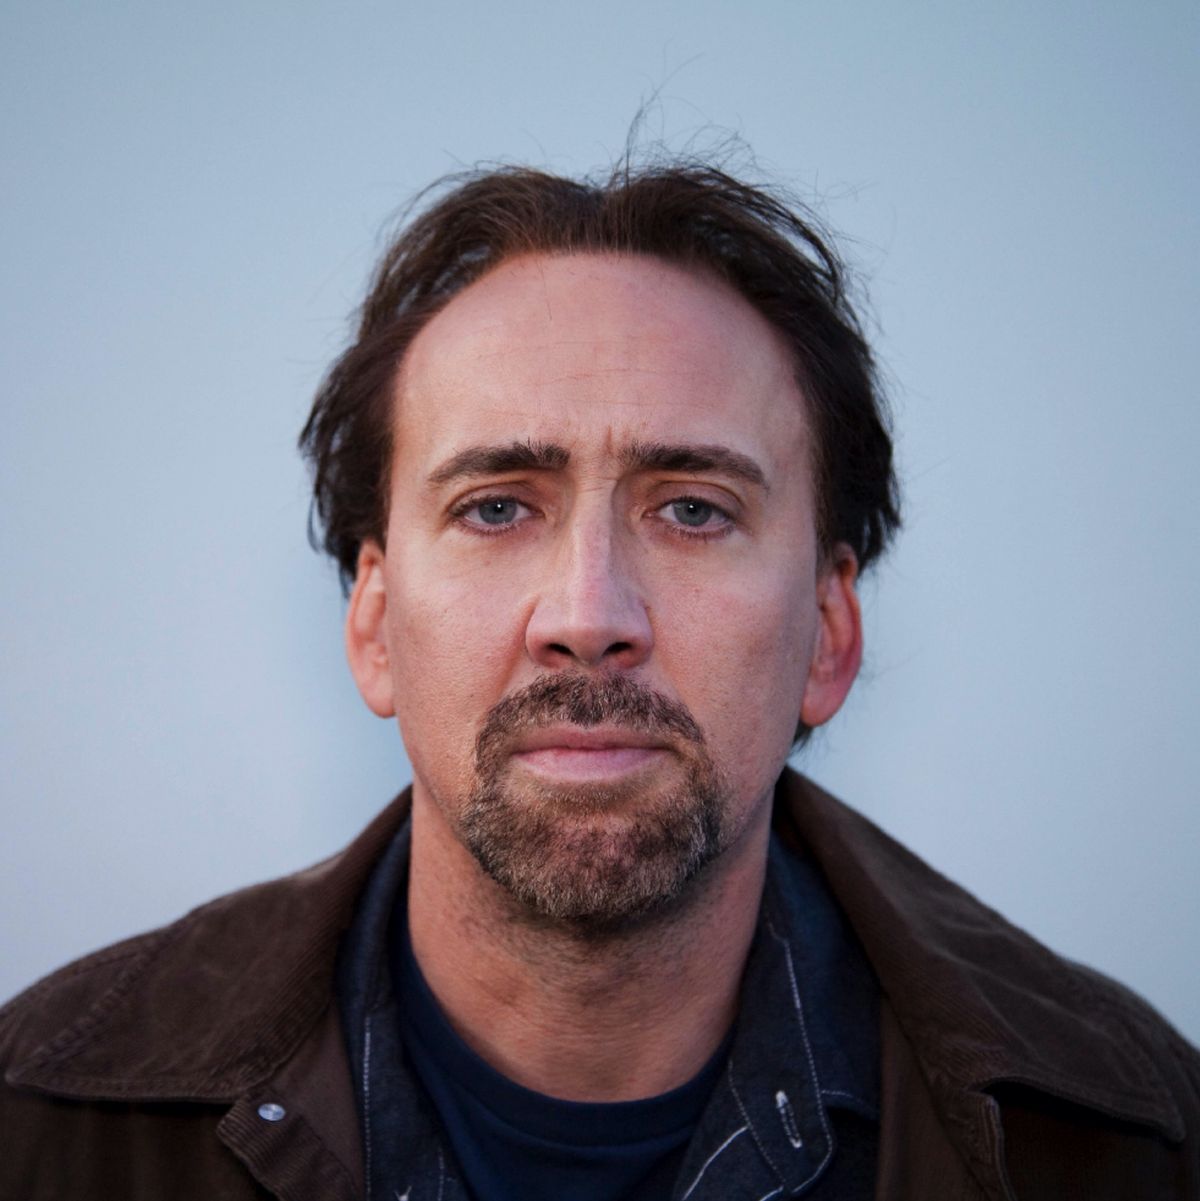 Nicolas Cage The Unbearable Weight of Massive Talent Plot, Details, Cast, Release Date